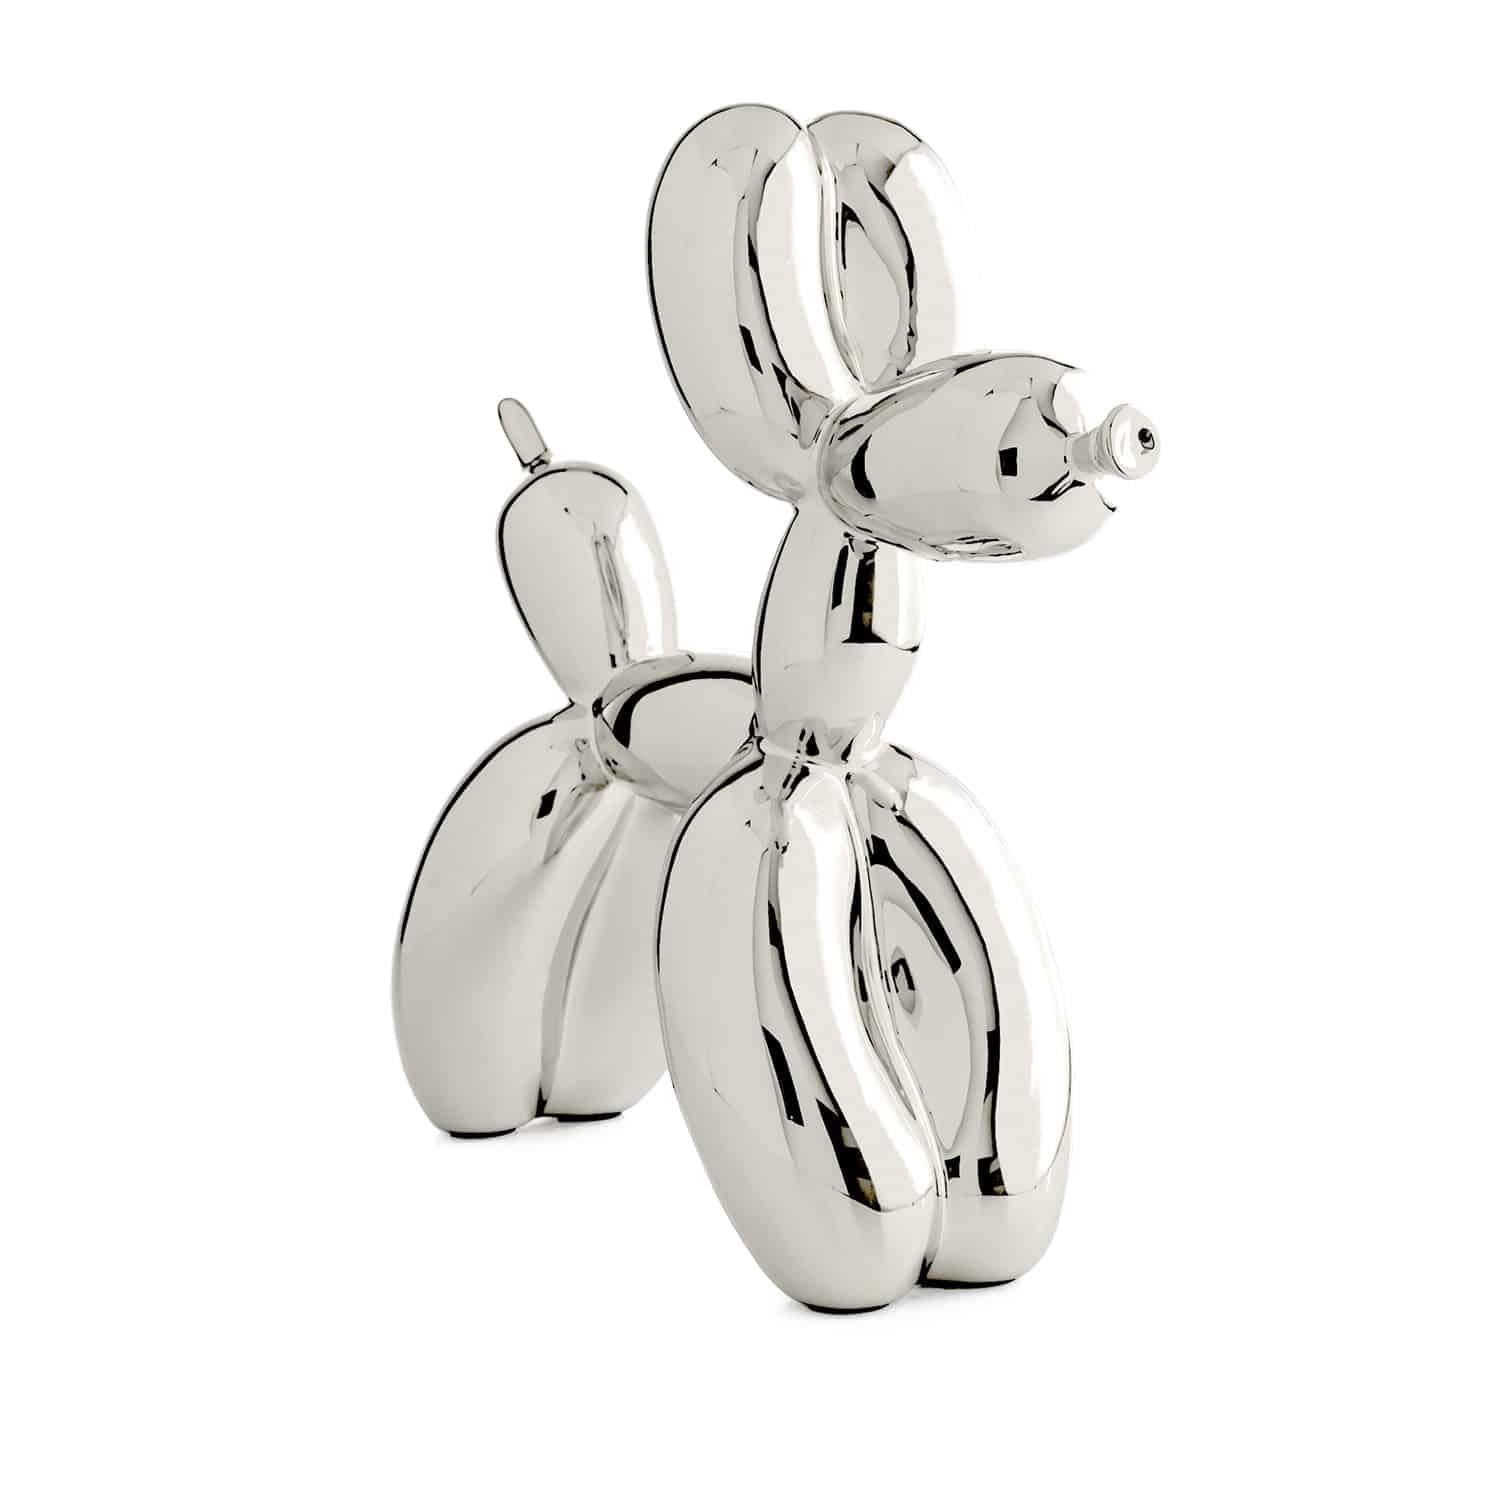 Balloon Dog (After) - Silver  - Pop Art Sculpture by After Jeff Koons